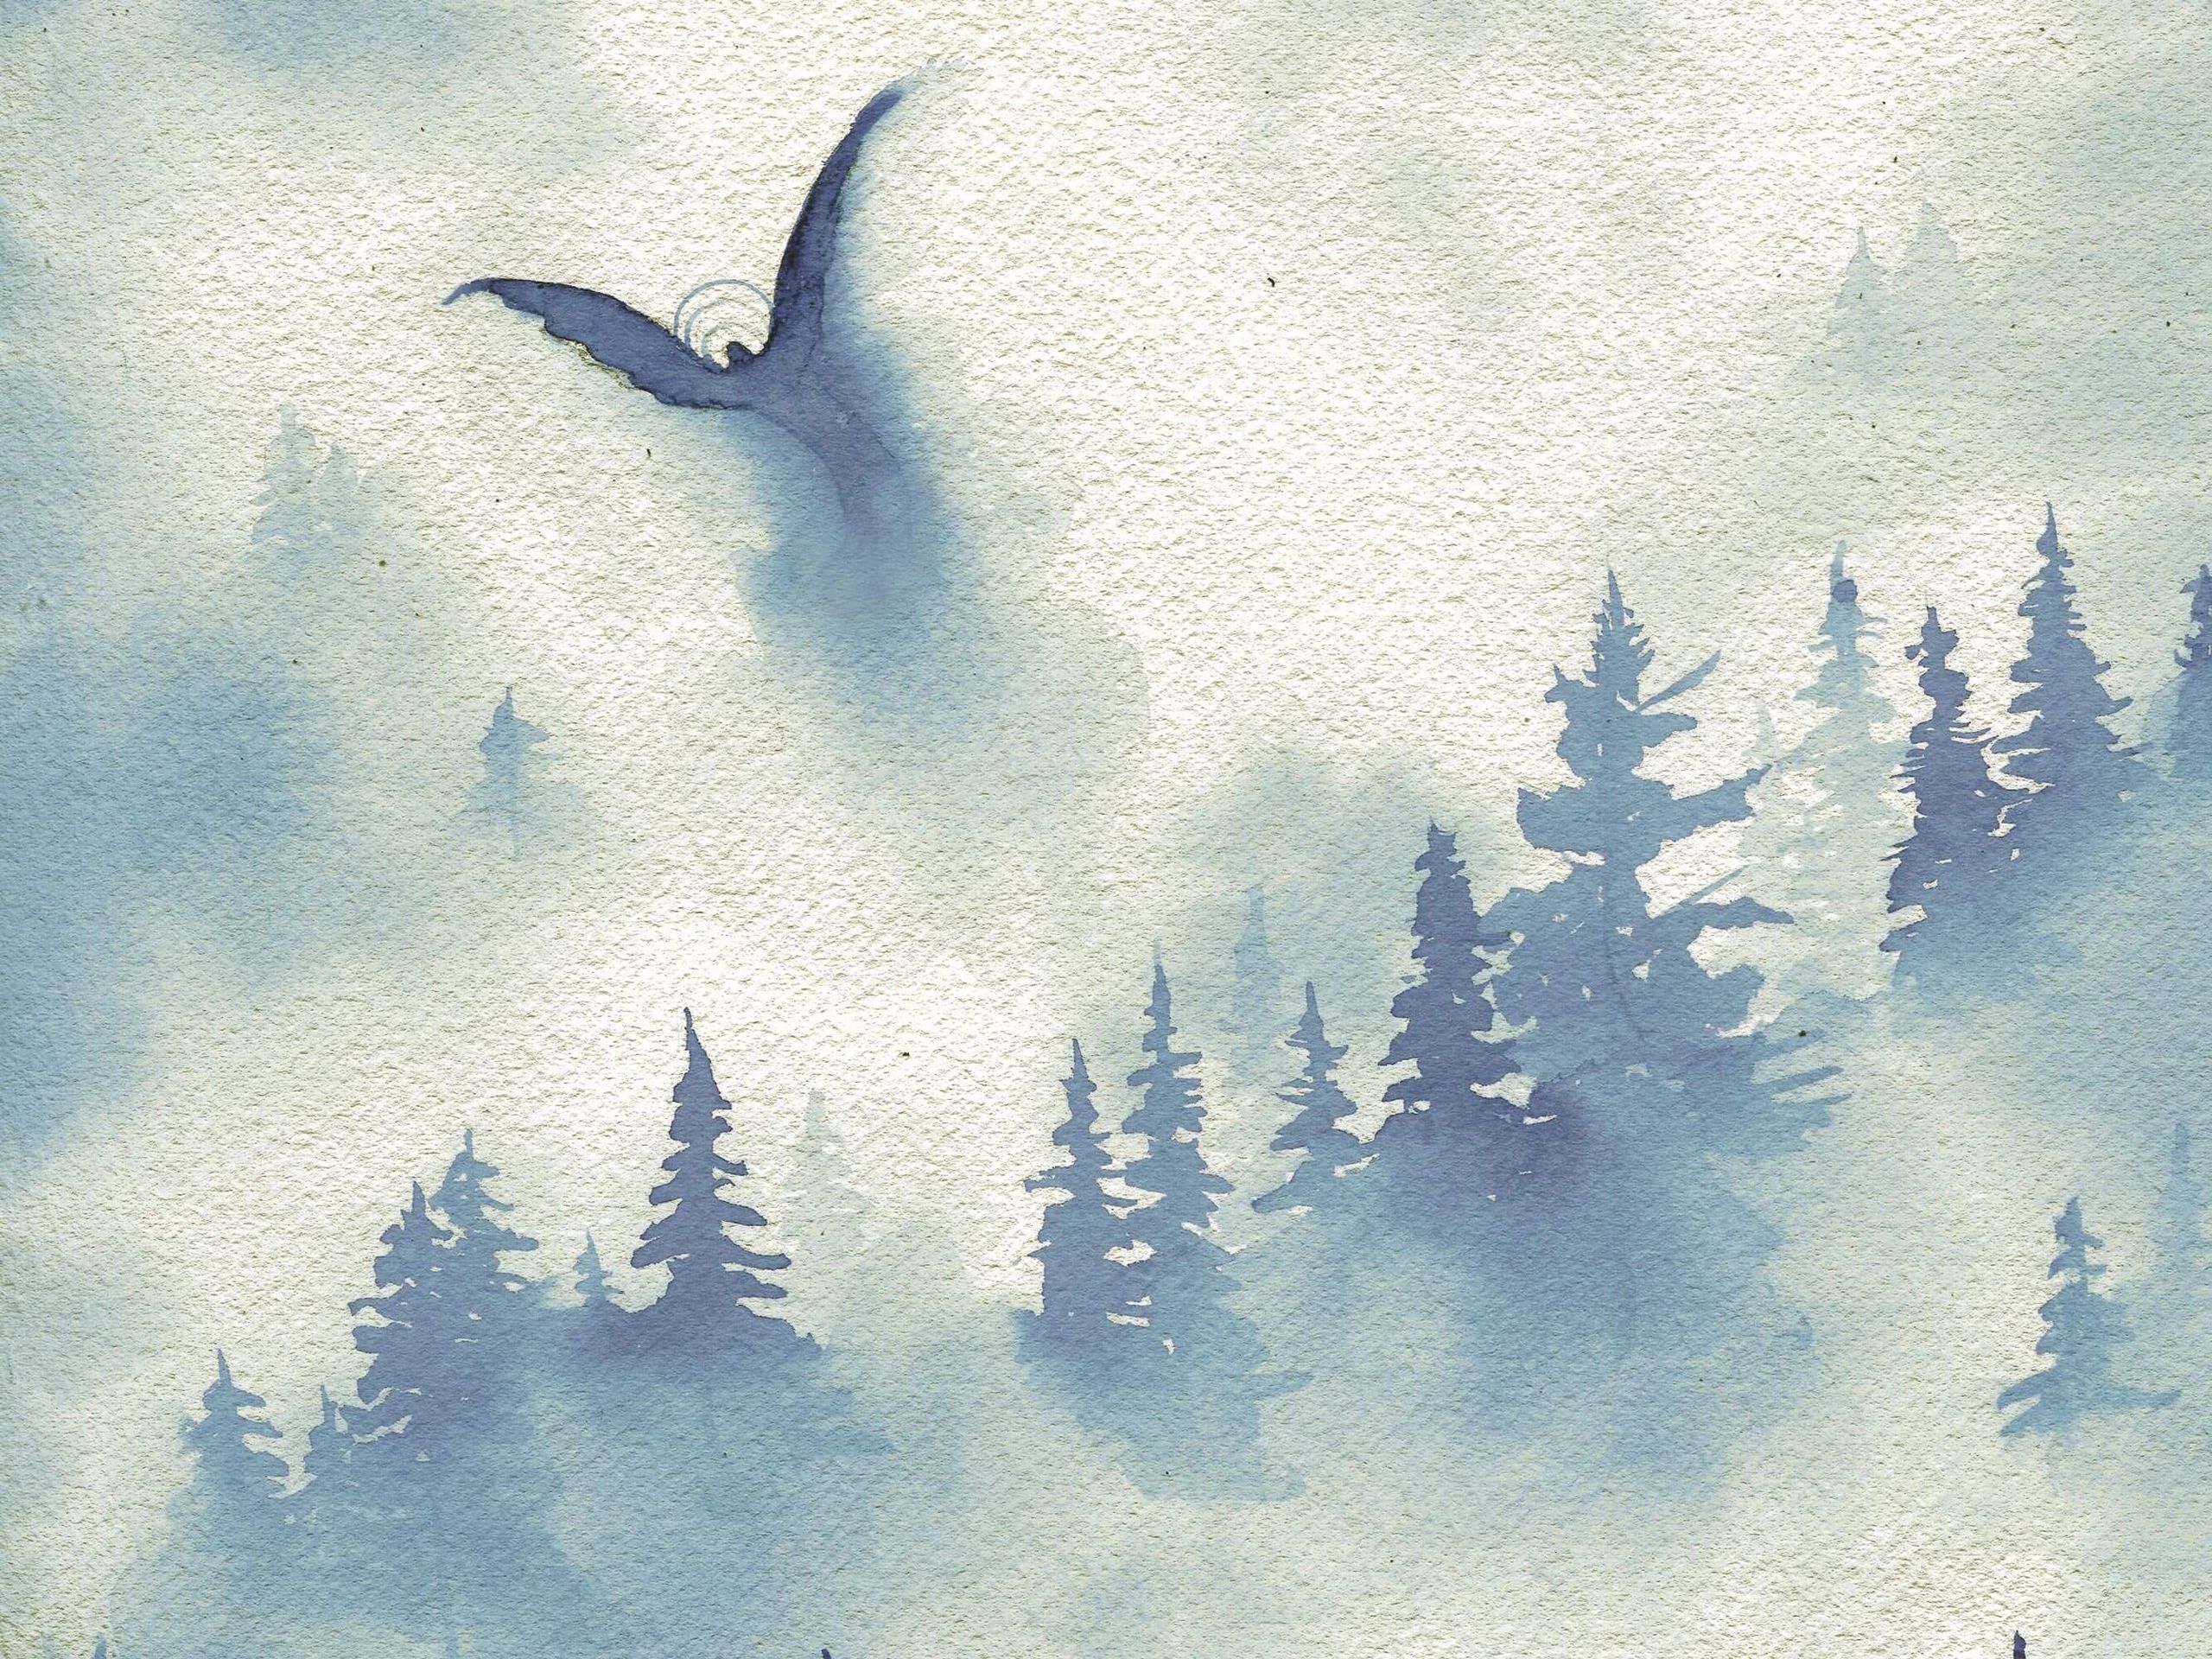 Angel flying through the misty mountains.